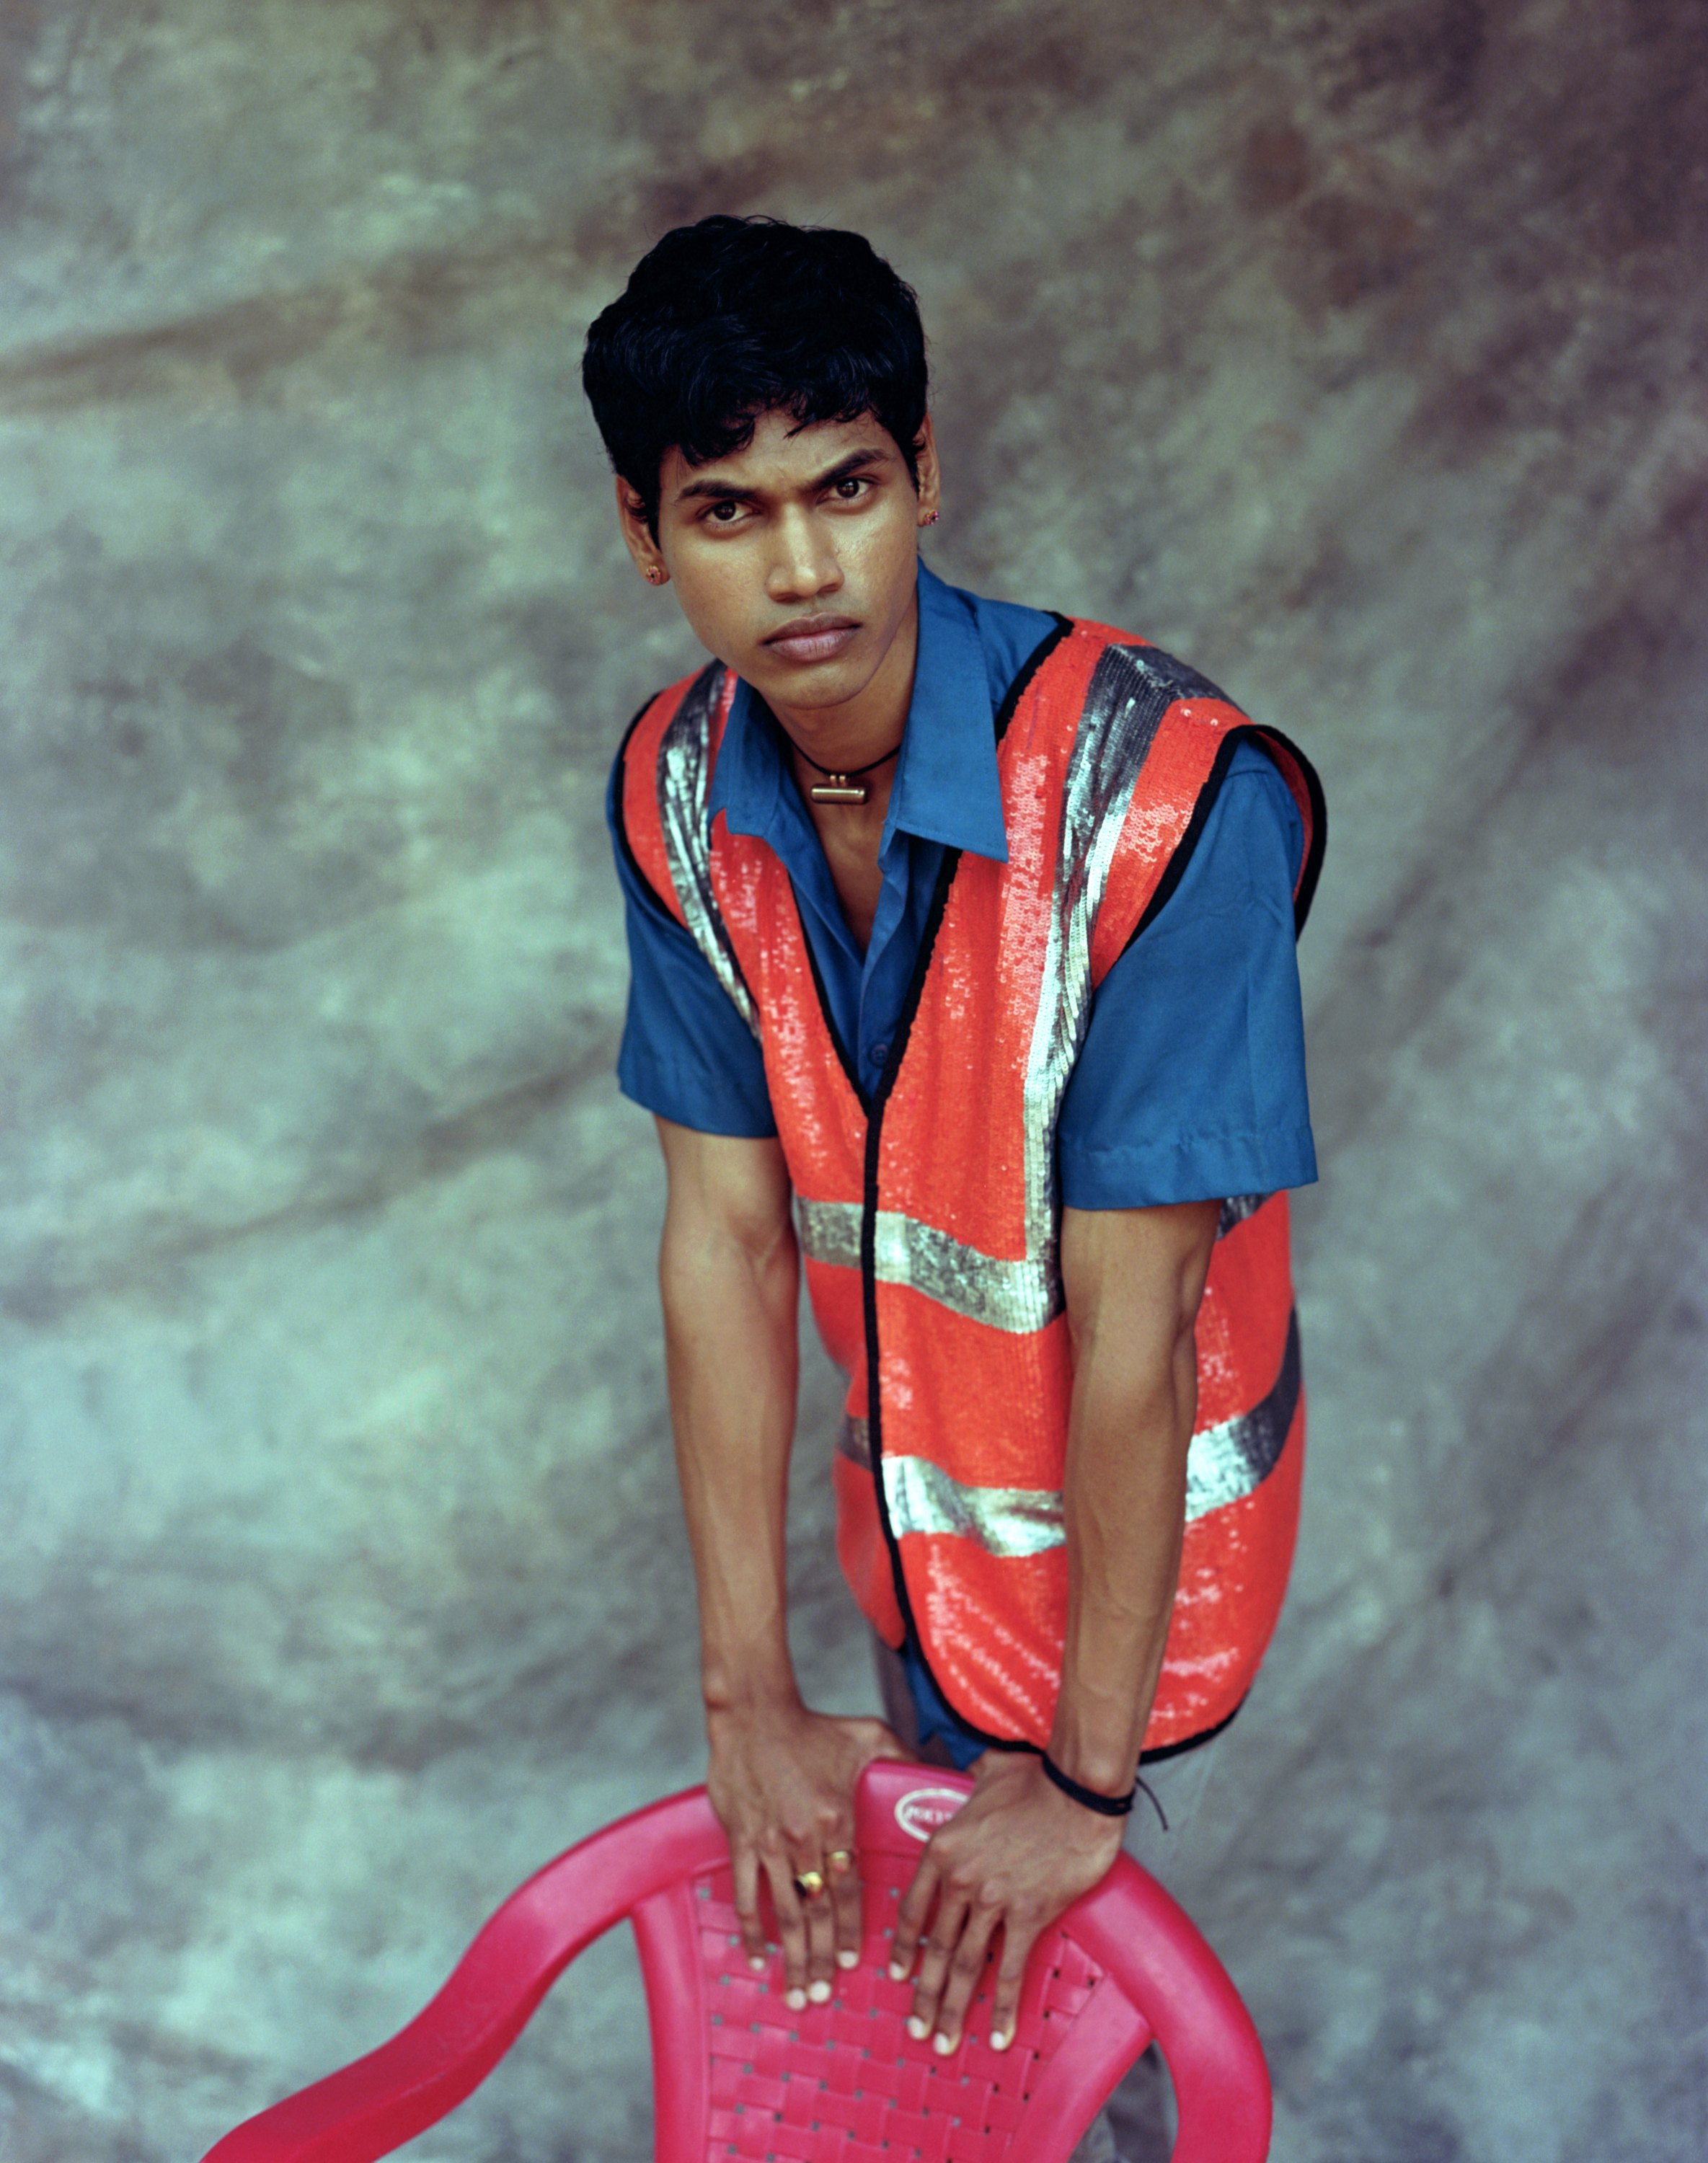 High Vis jacket by Ashish, from AW 2013. Photography by Ashish Shah.